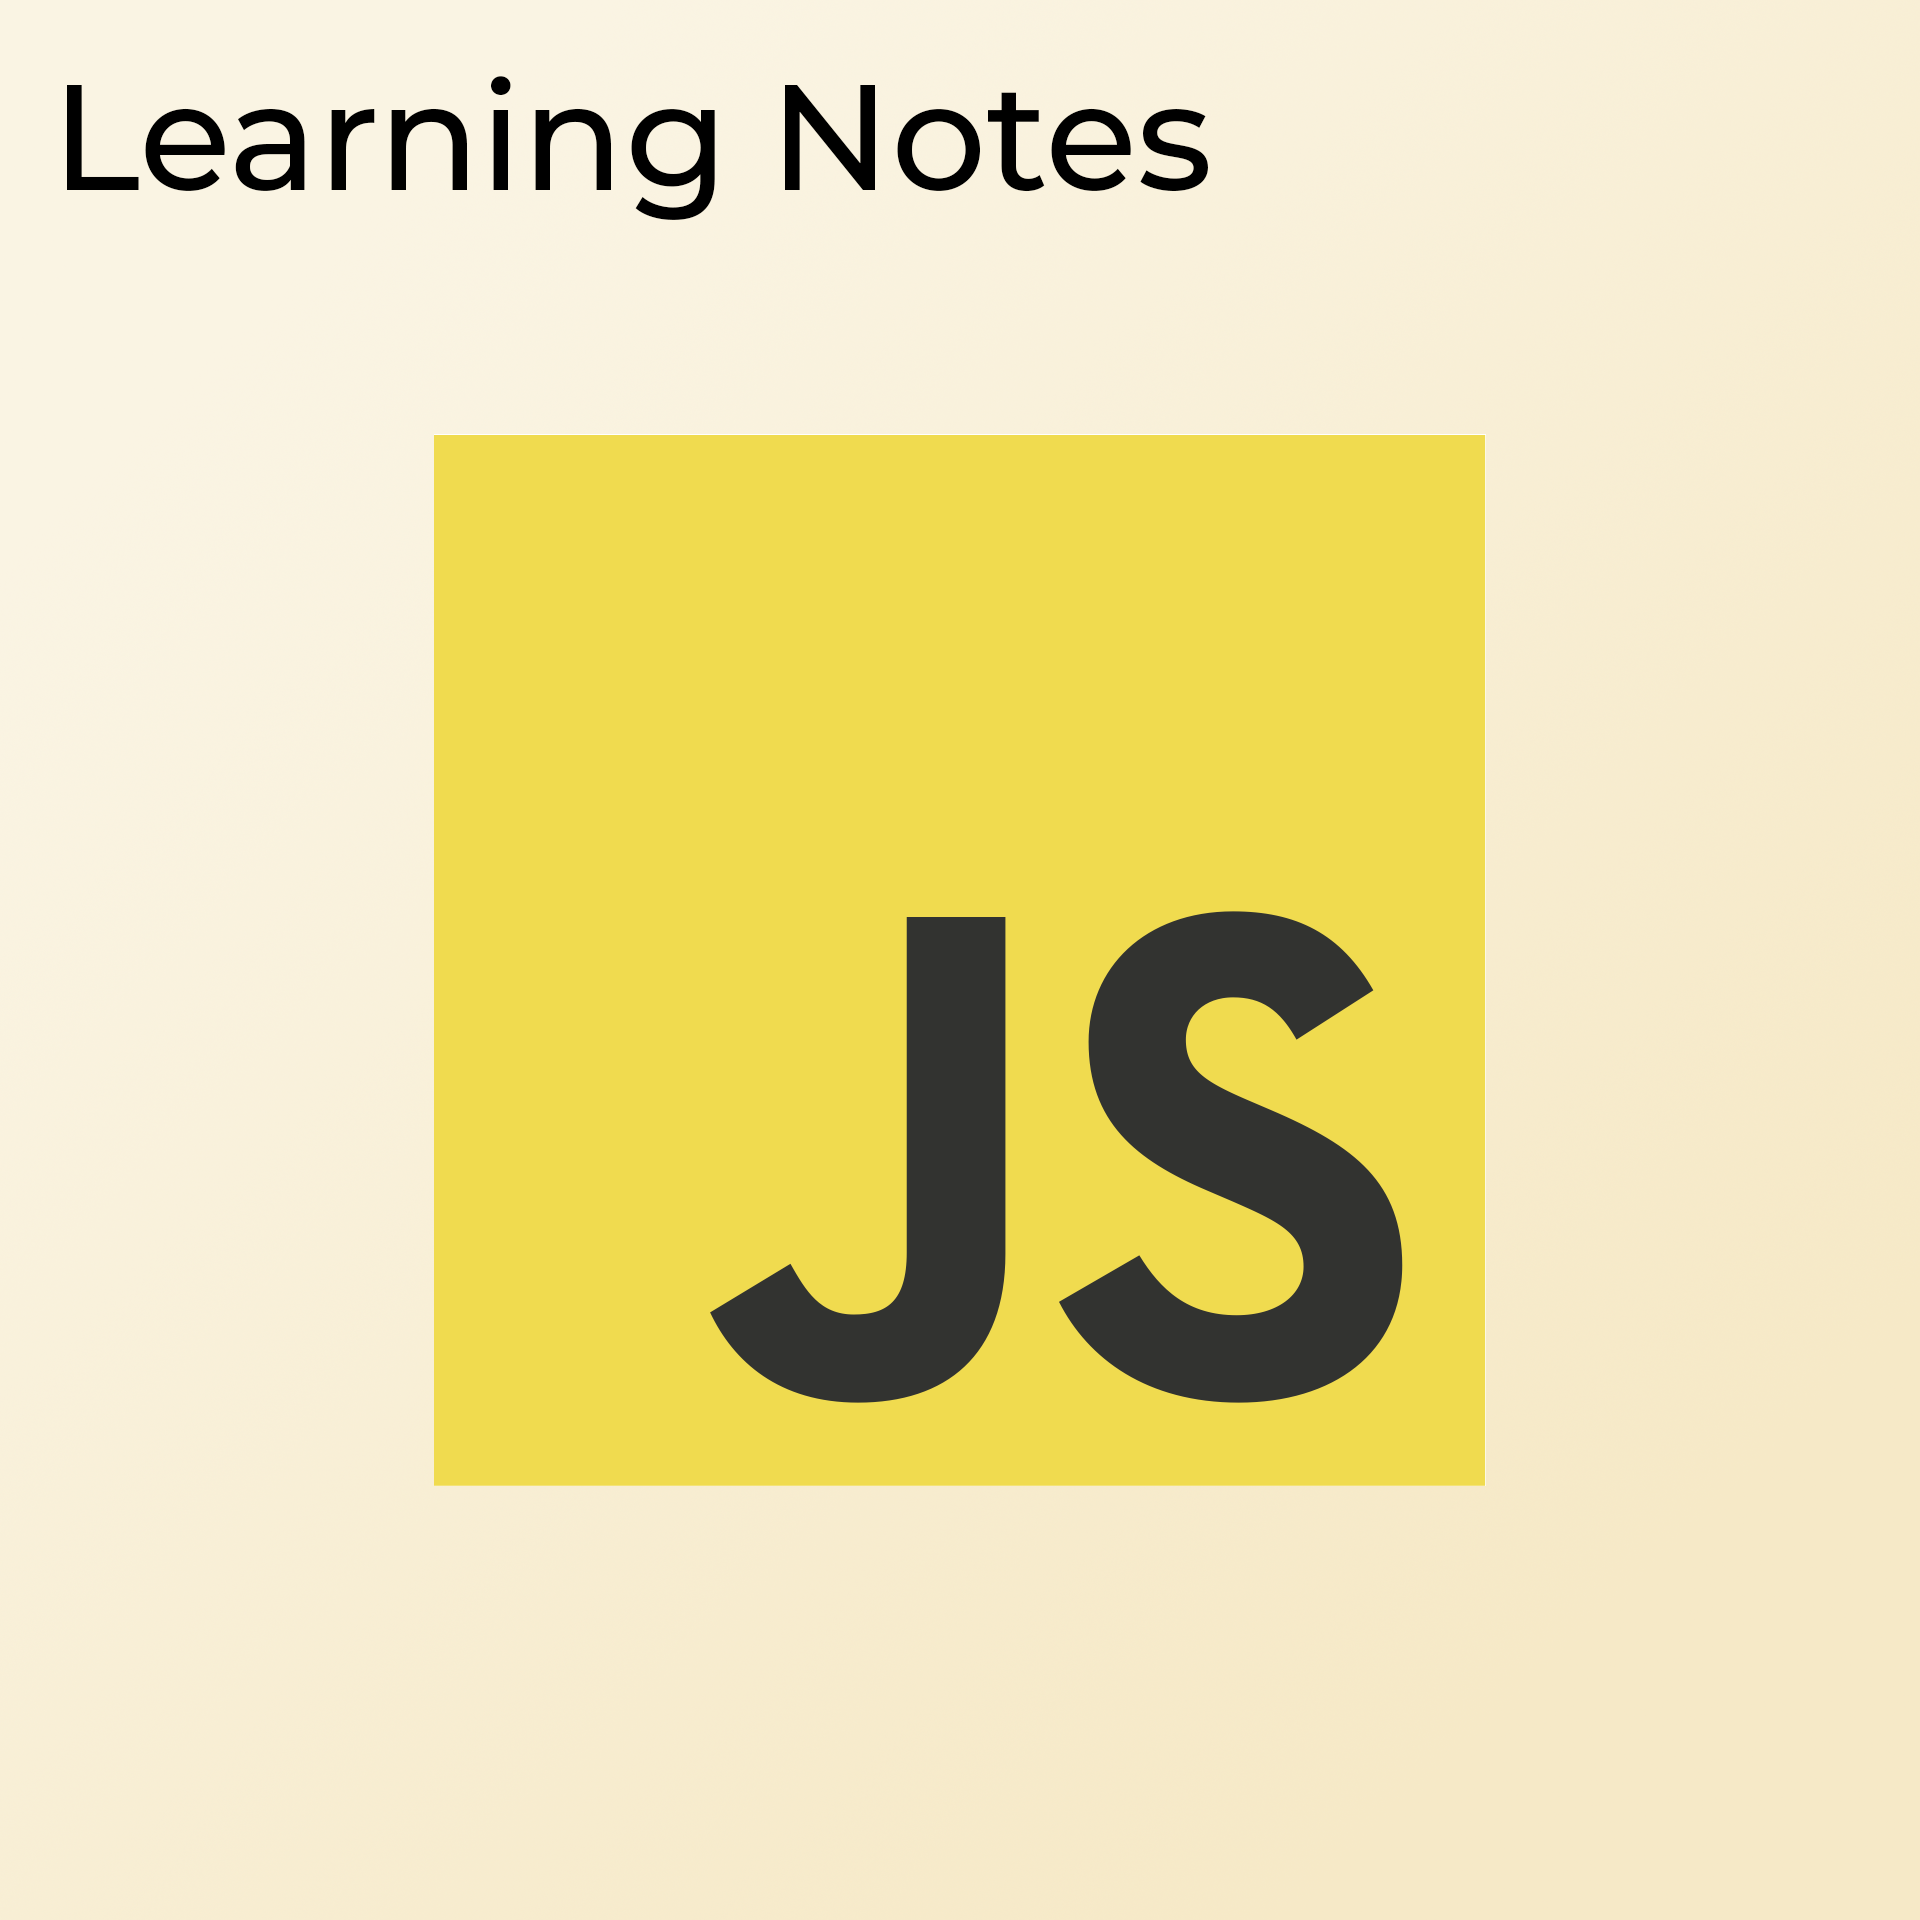 JavaScript Learning Notes